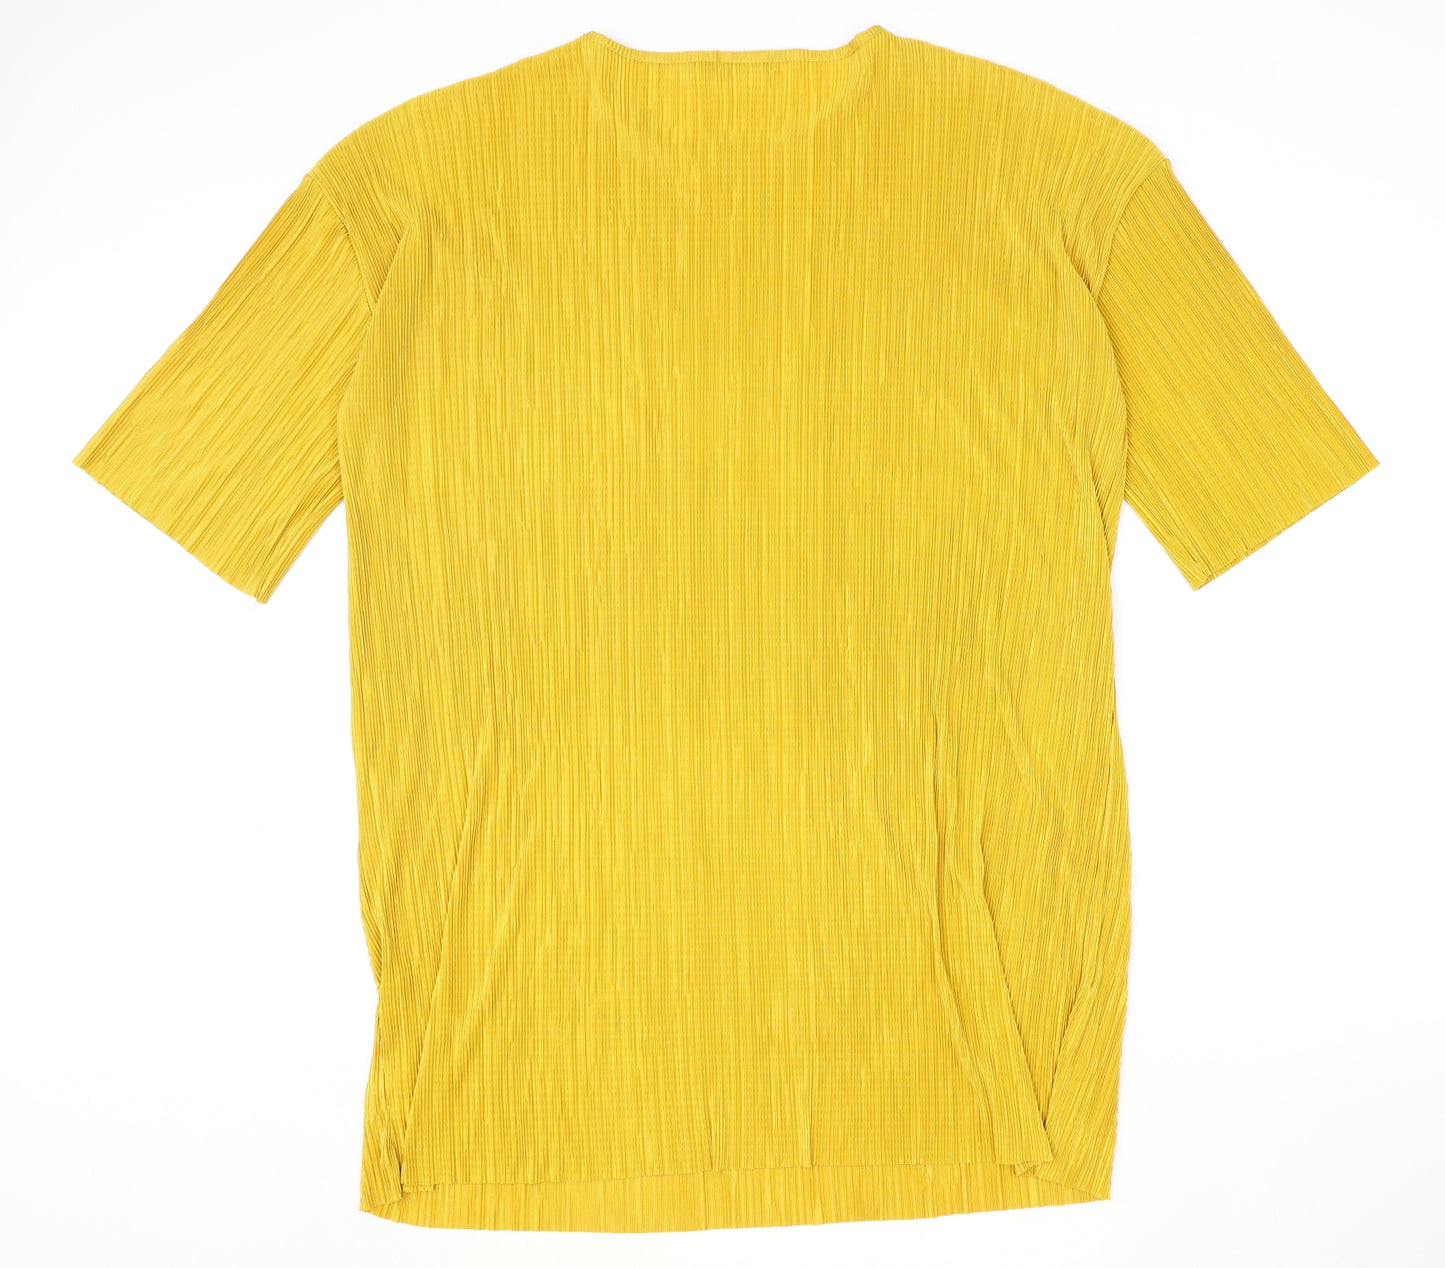 Boohoo Womens Yellow Polyester Jersey T-Shirt Size 18 Round Neck